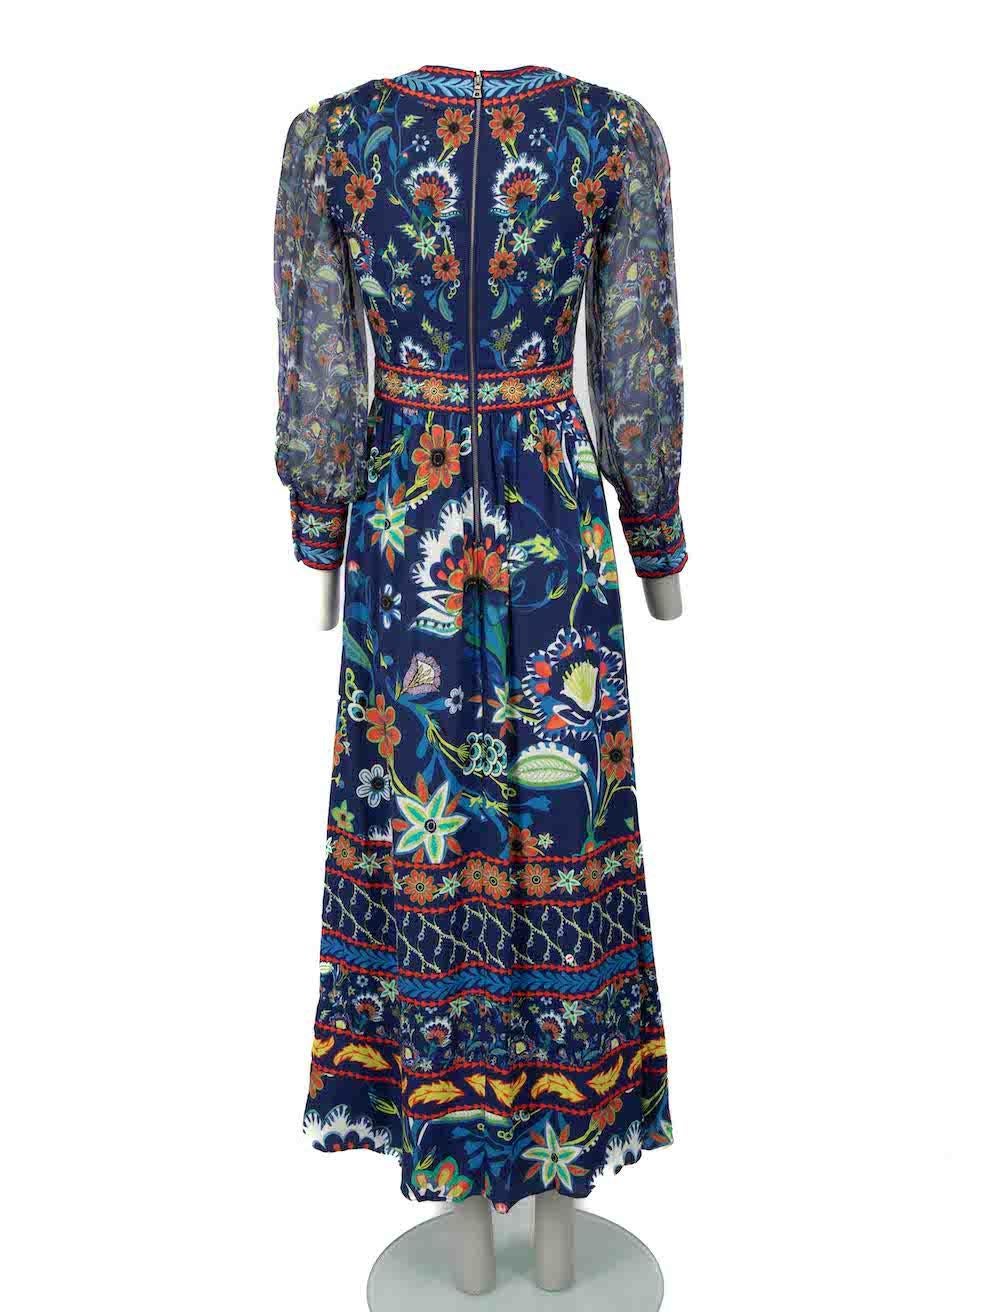 Alice + Olivia Floral Patterned Maxi Dress Size XXS In Excellent Condition For Sale In London, GB